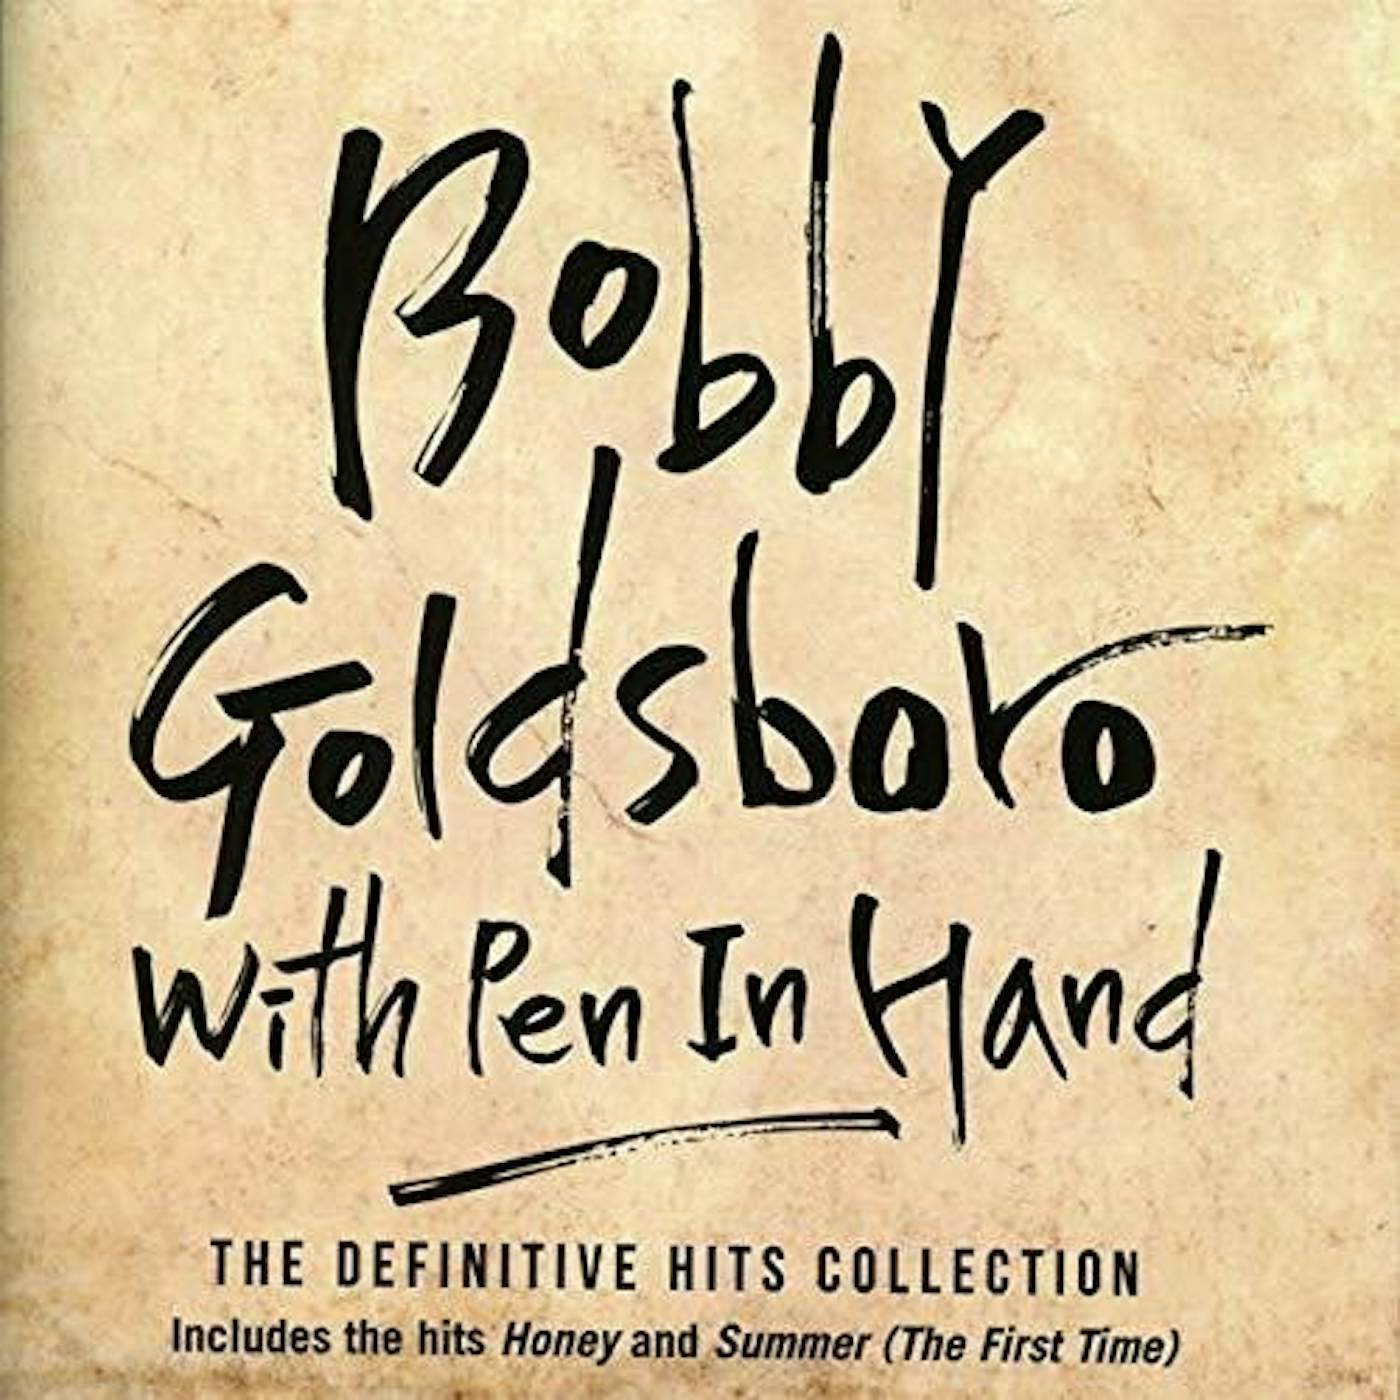 Bobby Goldsboro DEFINITIVE HITS COLLECTION CD